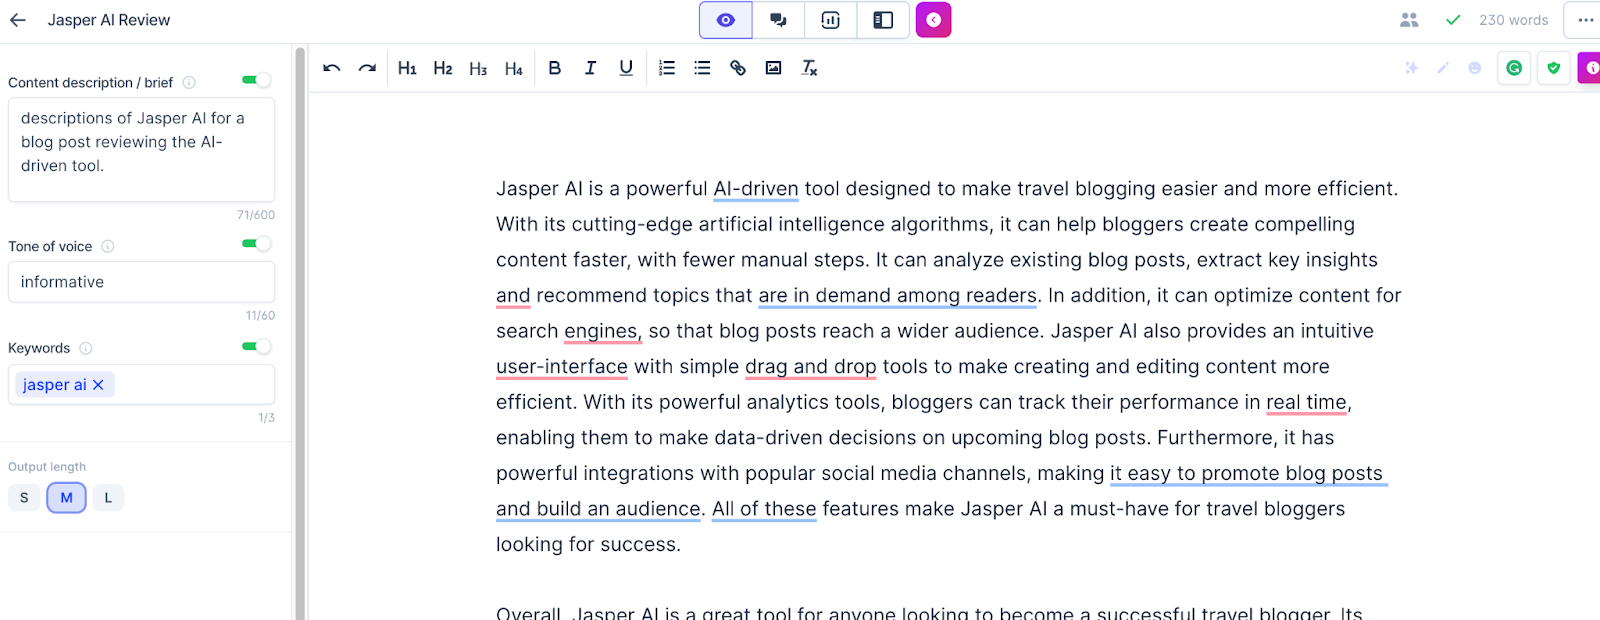 The image displays the content editor in the Jasper interface. I asked to Jasper to describe itself and it wrote a long paragraph that I’ve included just below in the main text of this article.